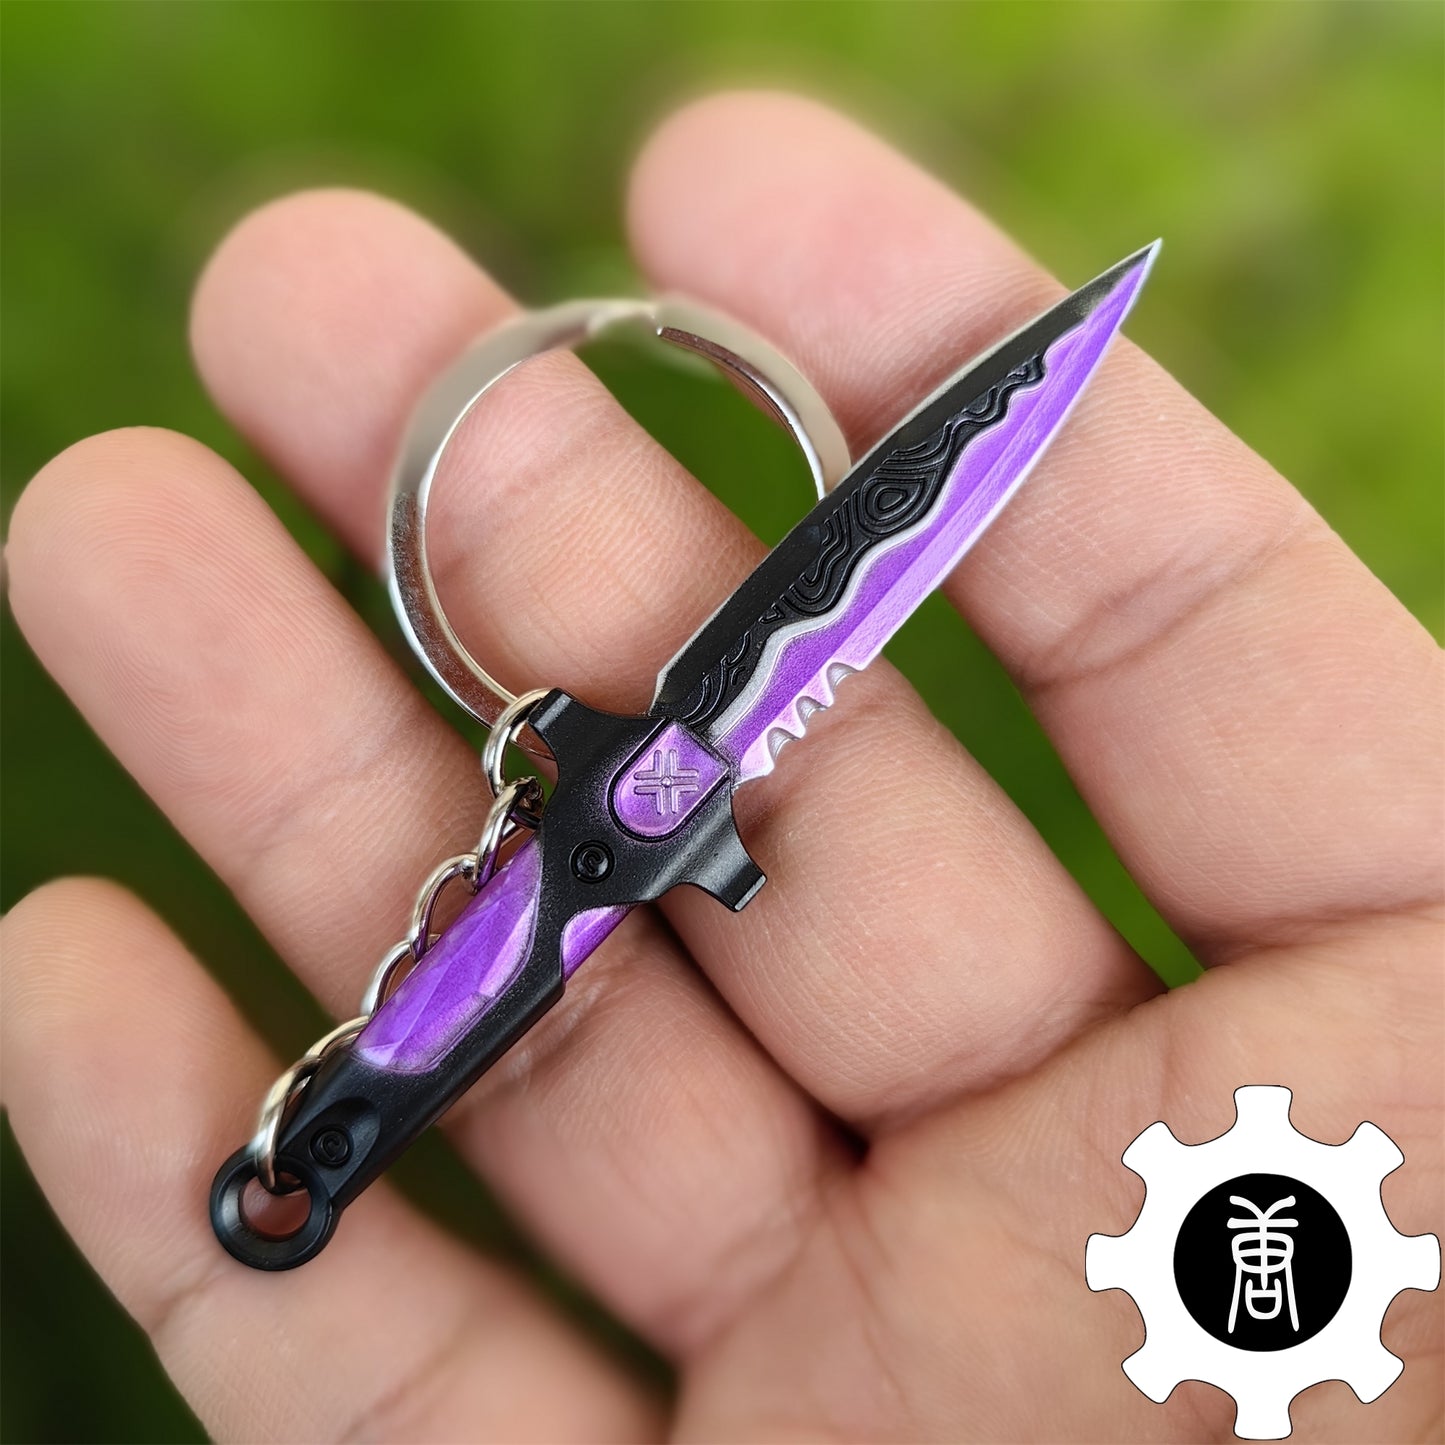 VCT Knife Keychain Backpack Pendant 4 Colors Option